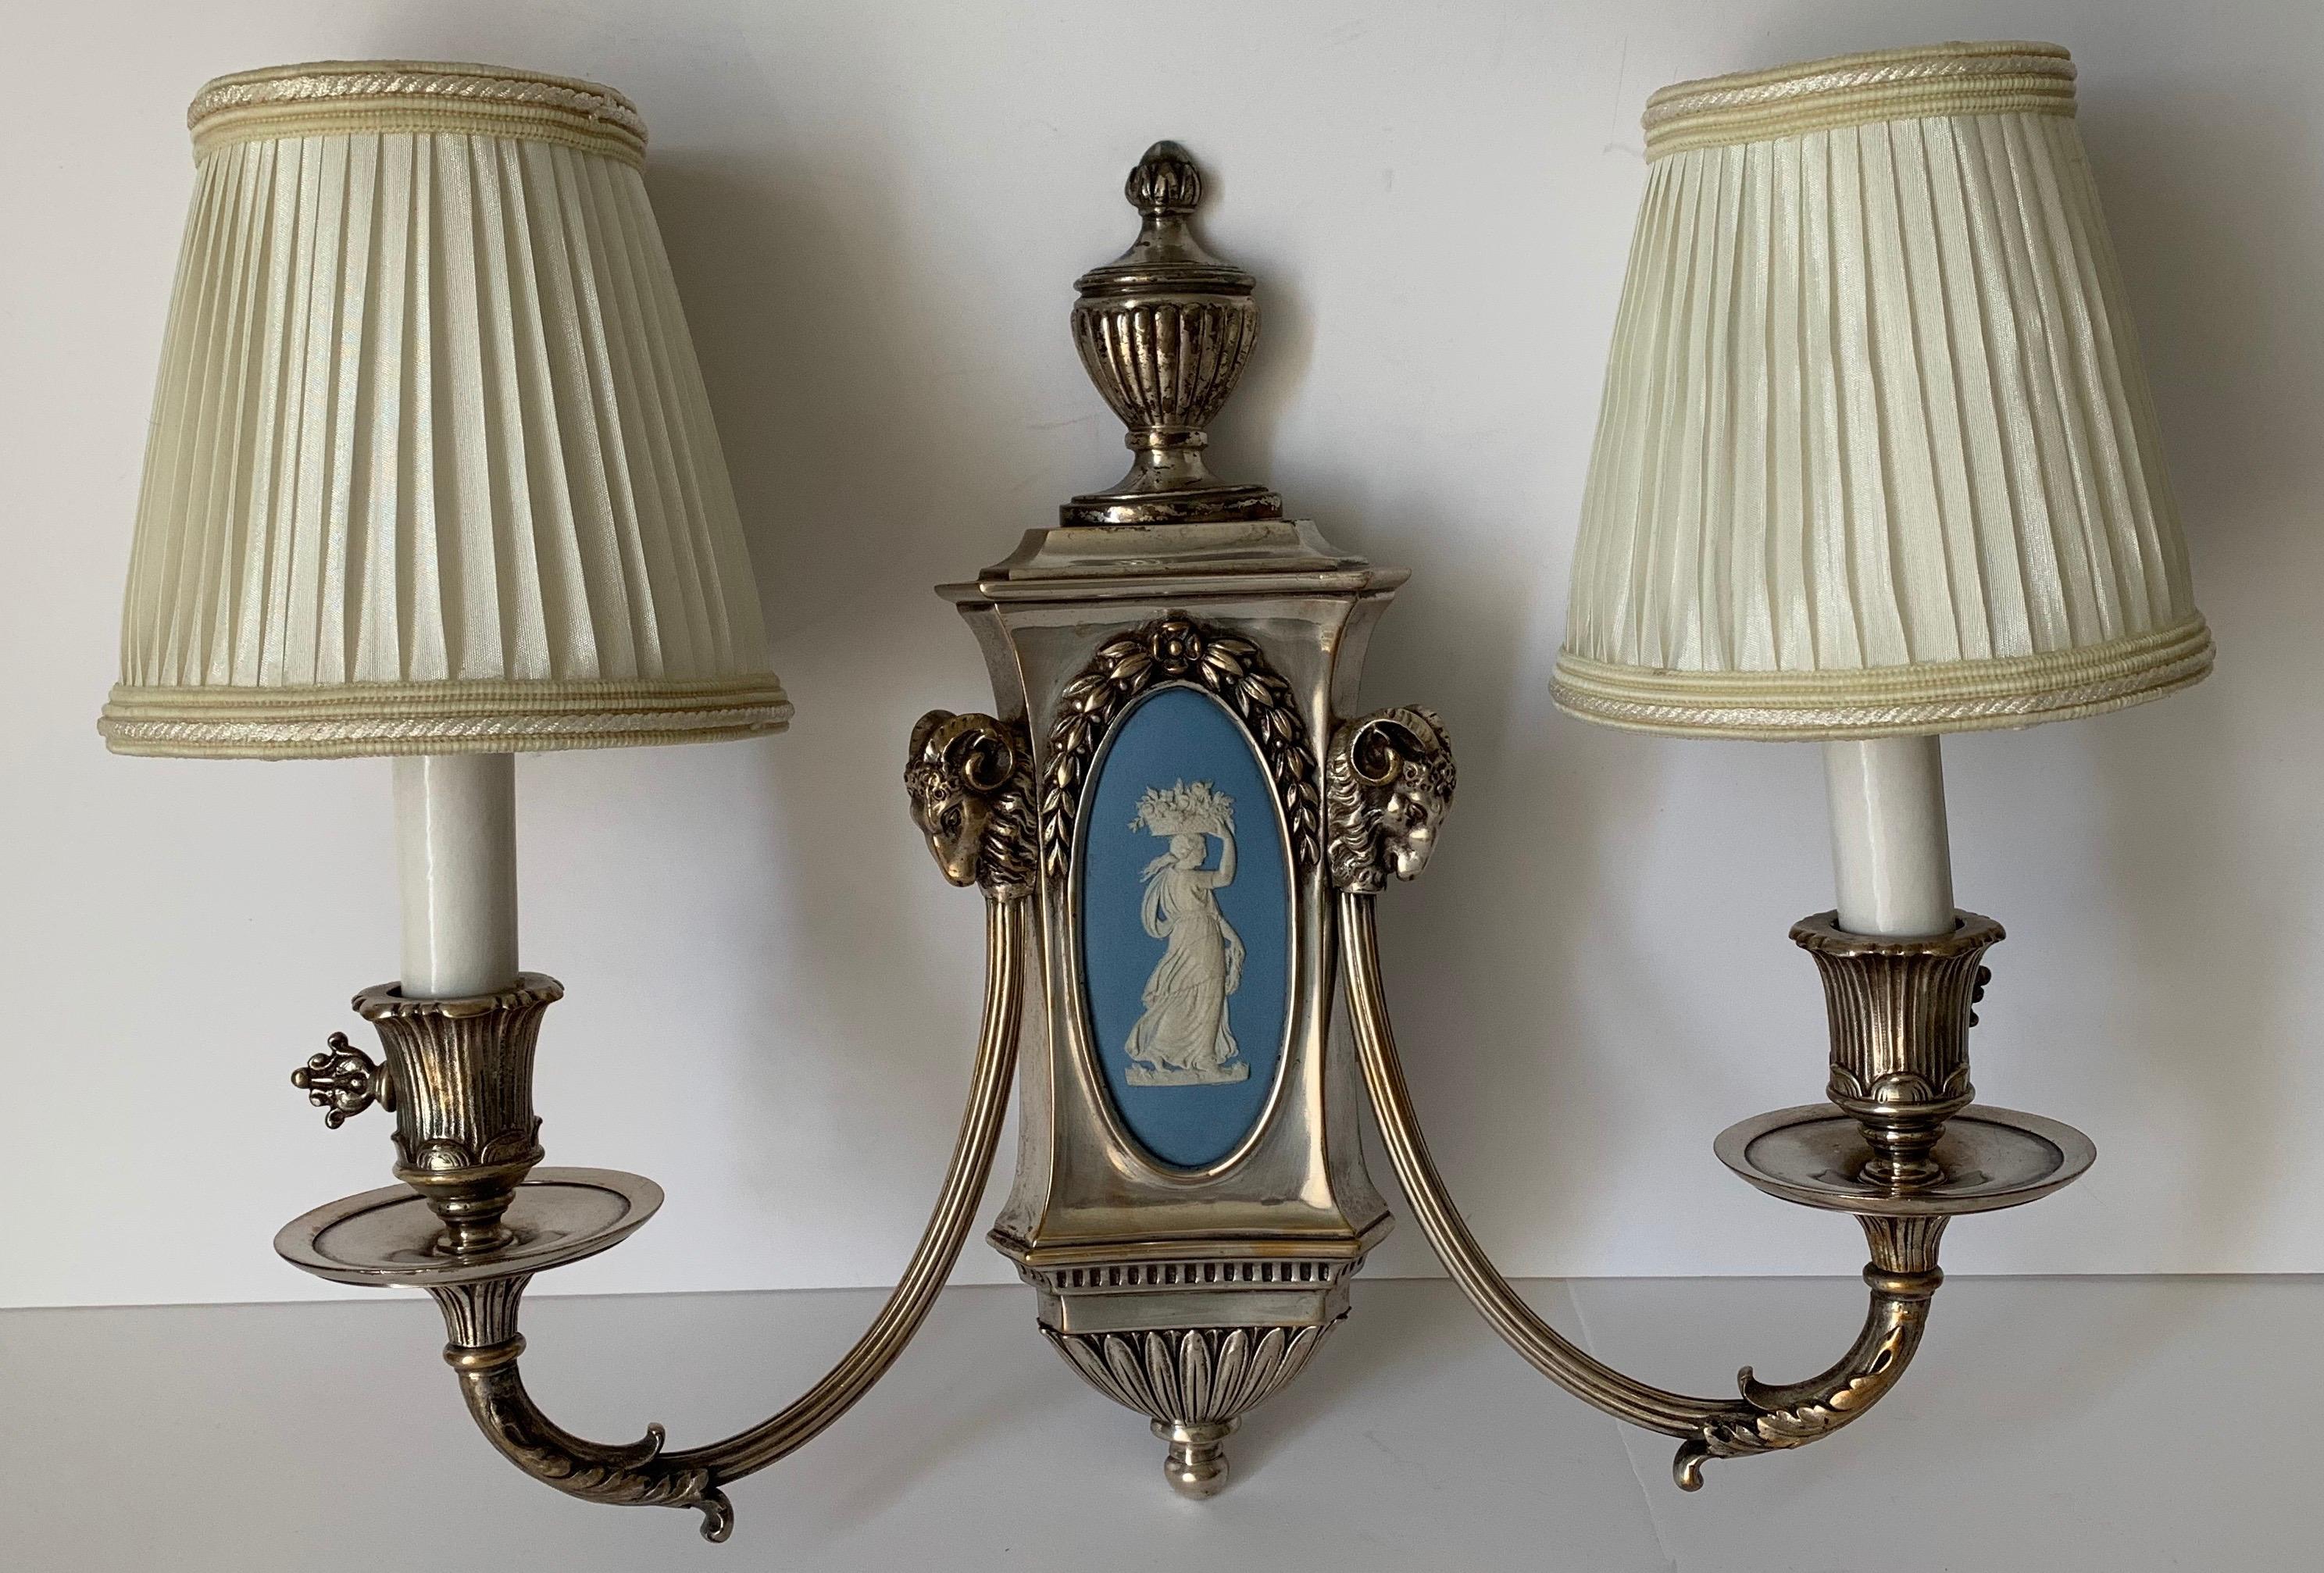 Pair of silver sconces by E.F. Caldwell. Wedgwood jasperware center plaques and silver plated bronze arms with urn and rams head detailing. Newly rewired. Each sconce takes two chandelier bulbs (not included). Ivory silk pleated lampshades are